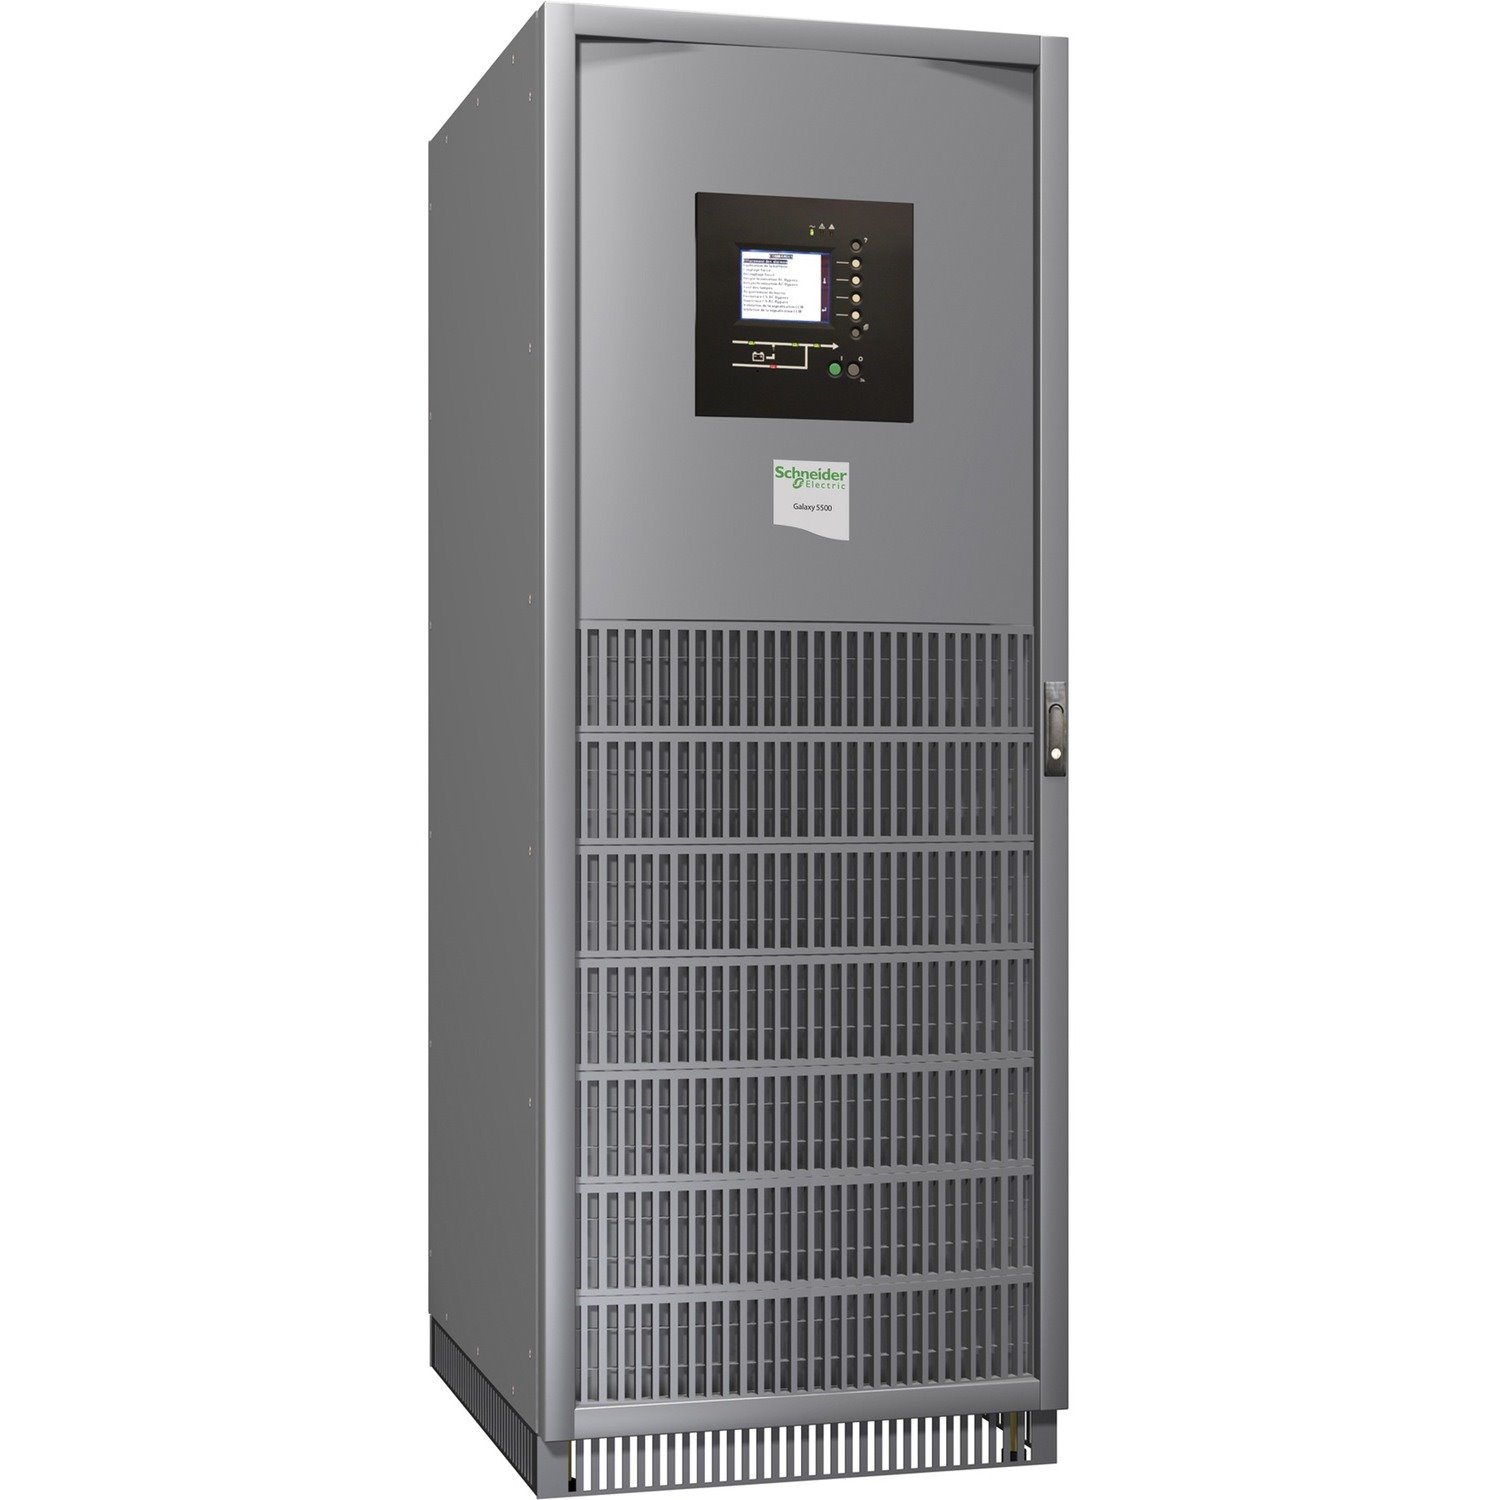 APC by Schneider Electric Galaxy 5500 Double Conversion Online UPS - 60 kVA